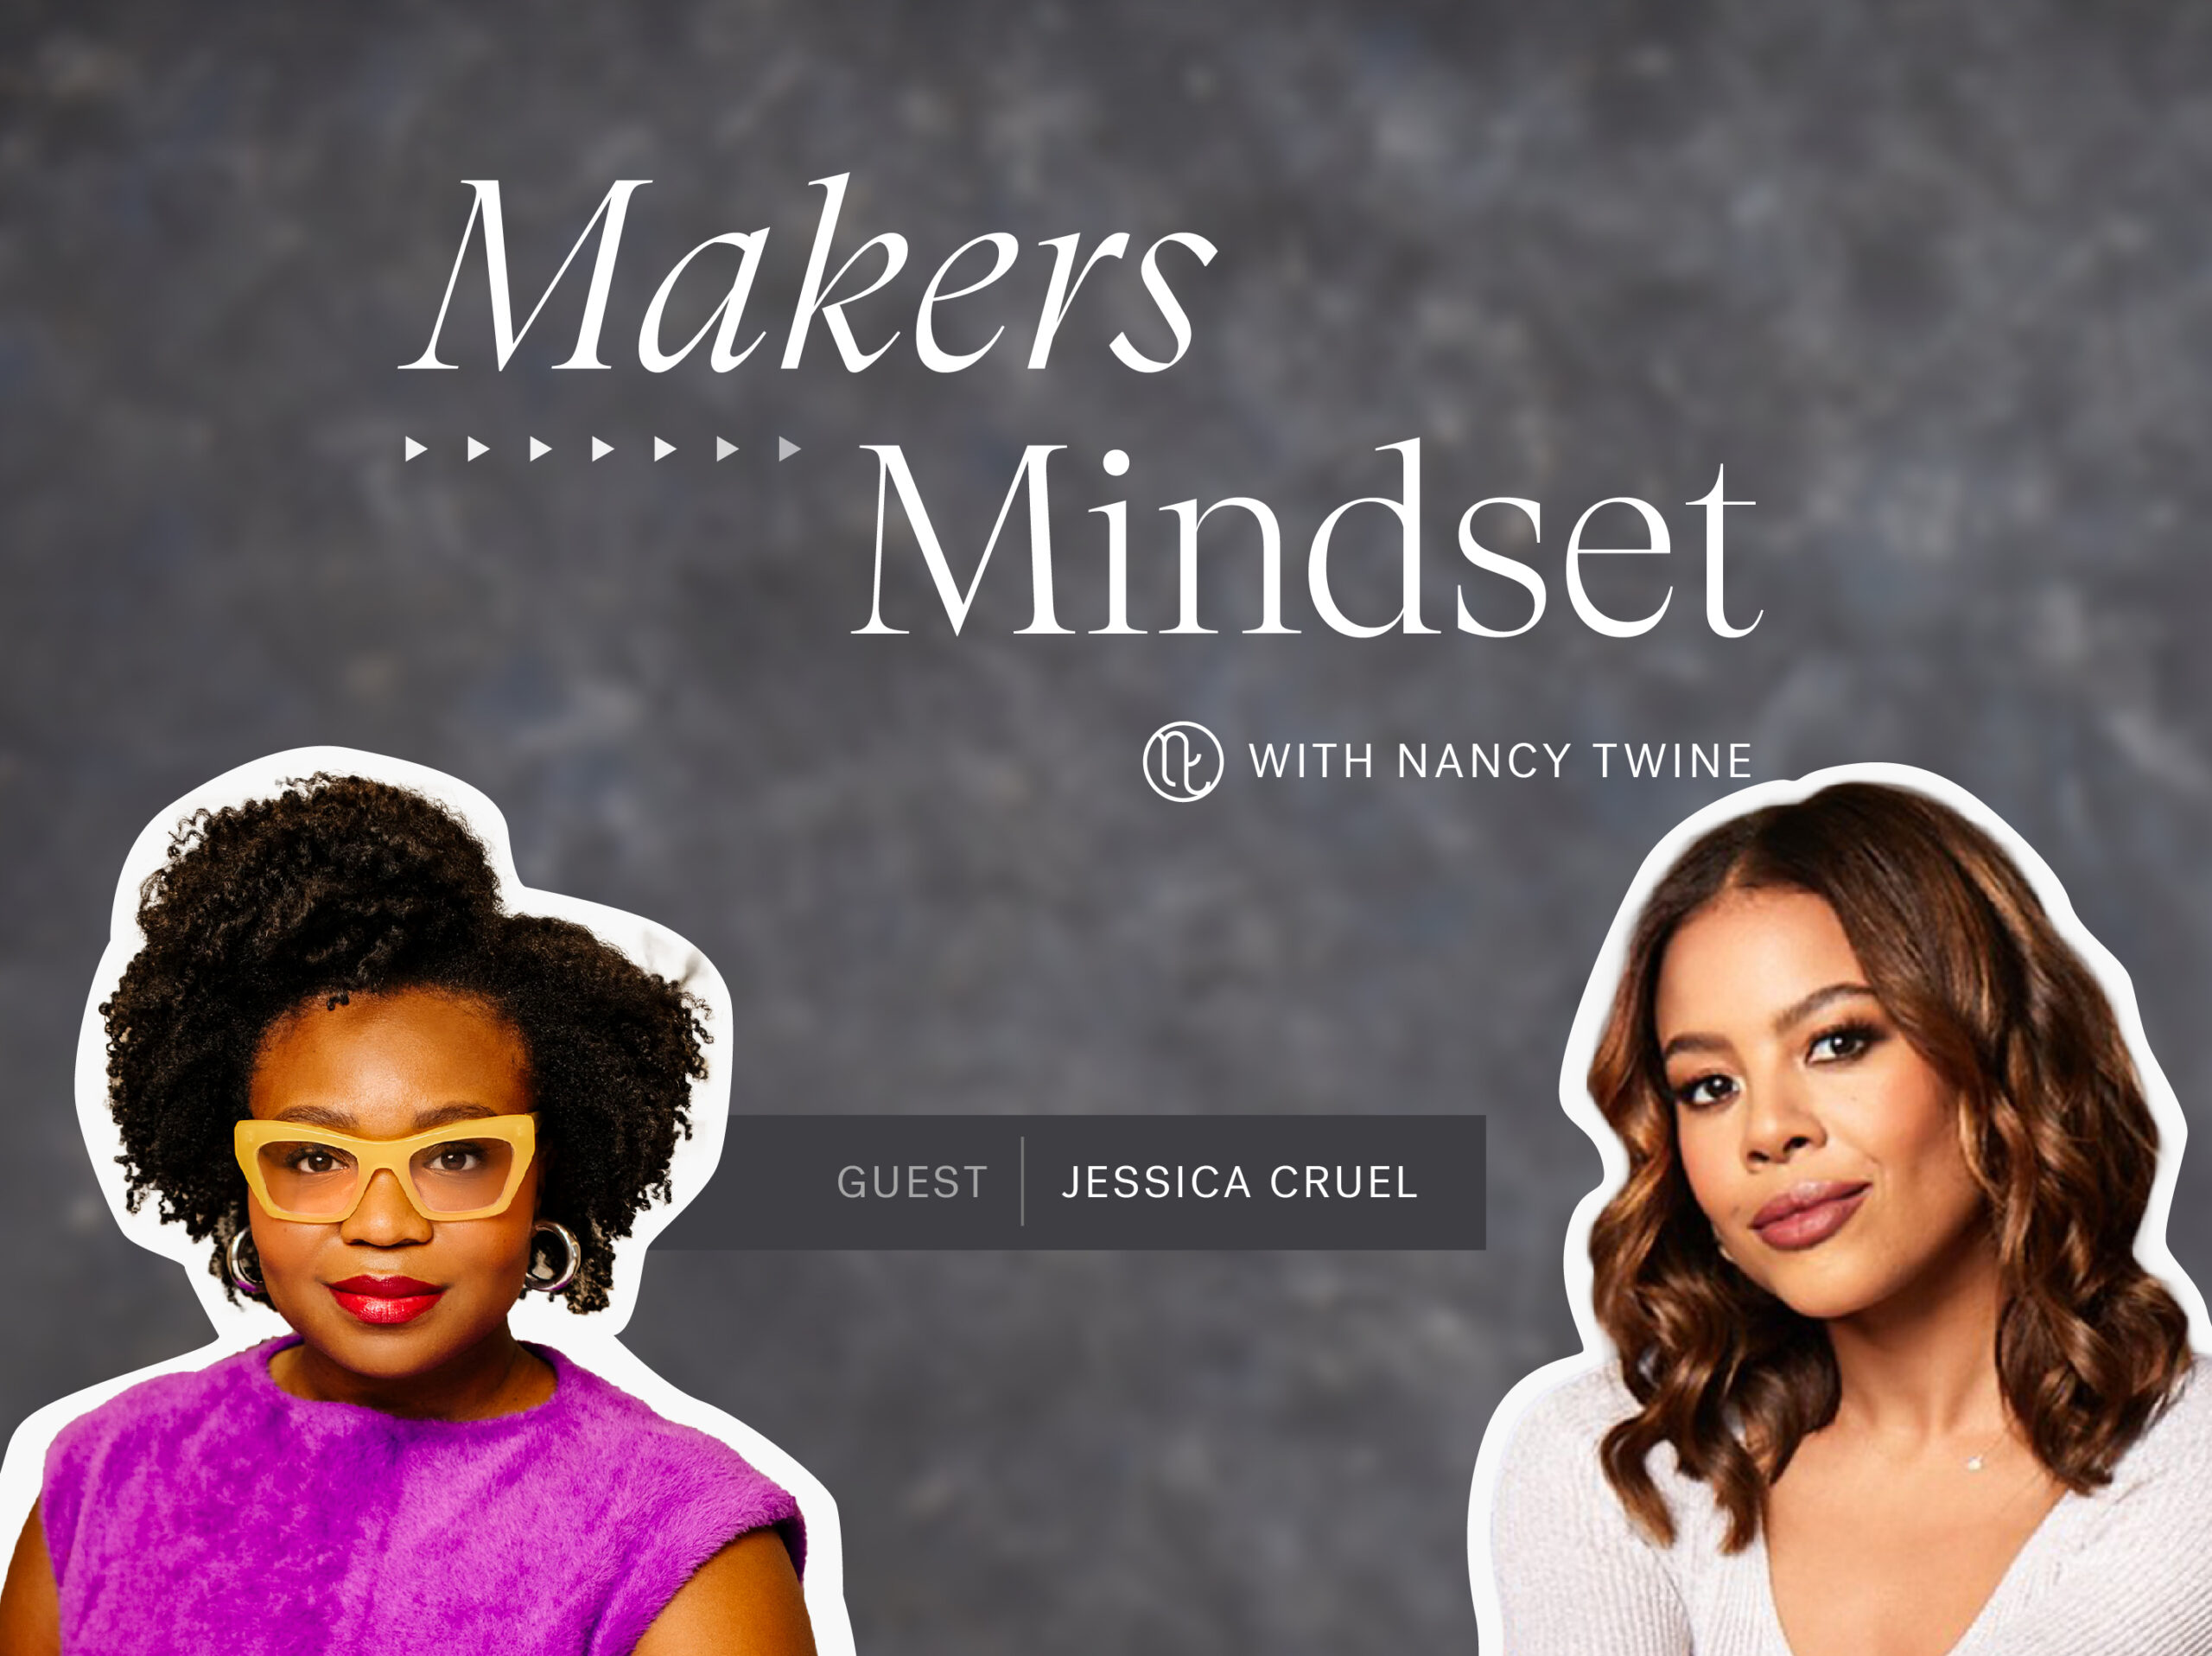 Cover image for Nancy Twine's podcast series "Makers Mindet" featuring an image of Jessica Cruel (left) and Nancy Twine (right).